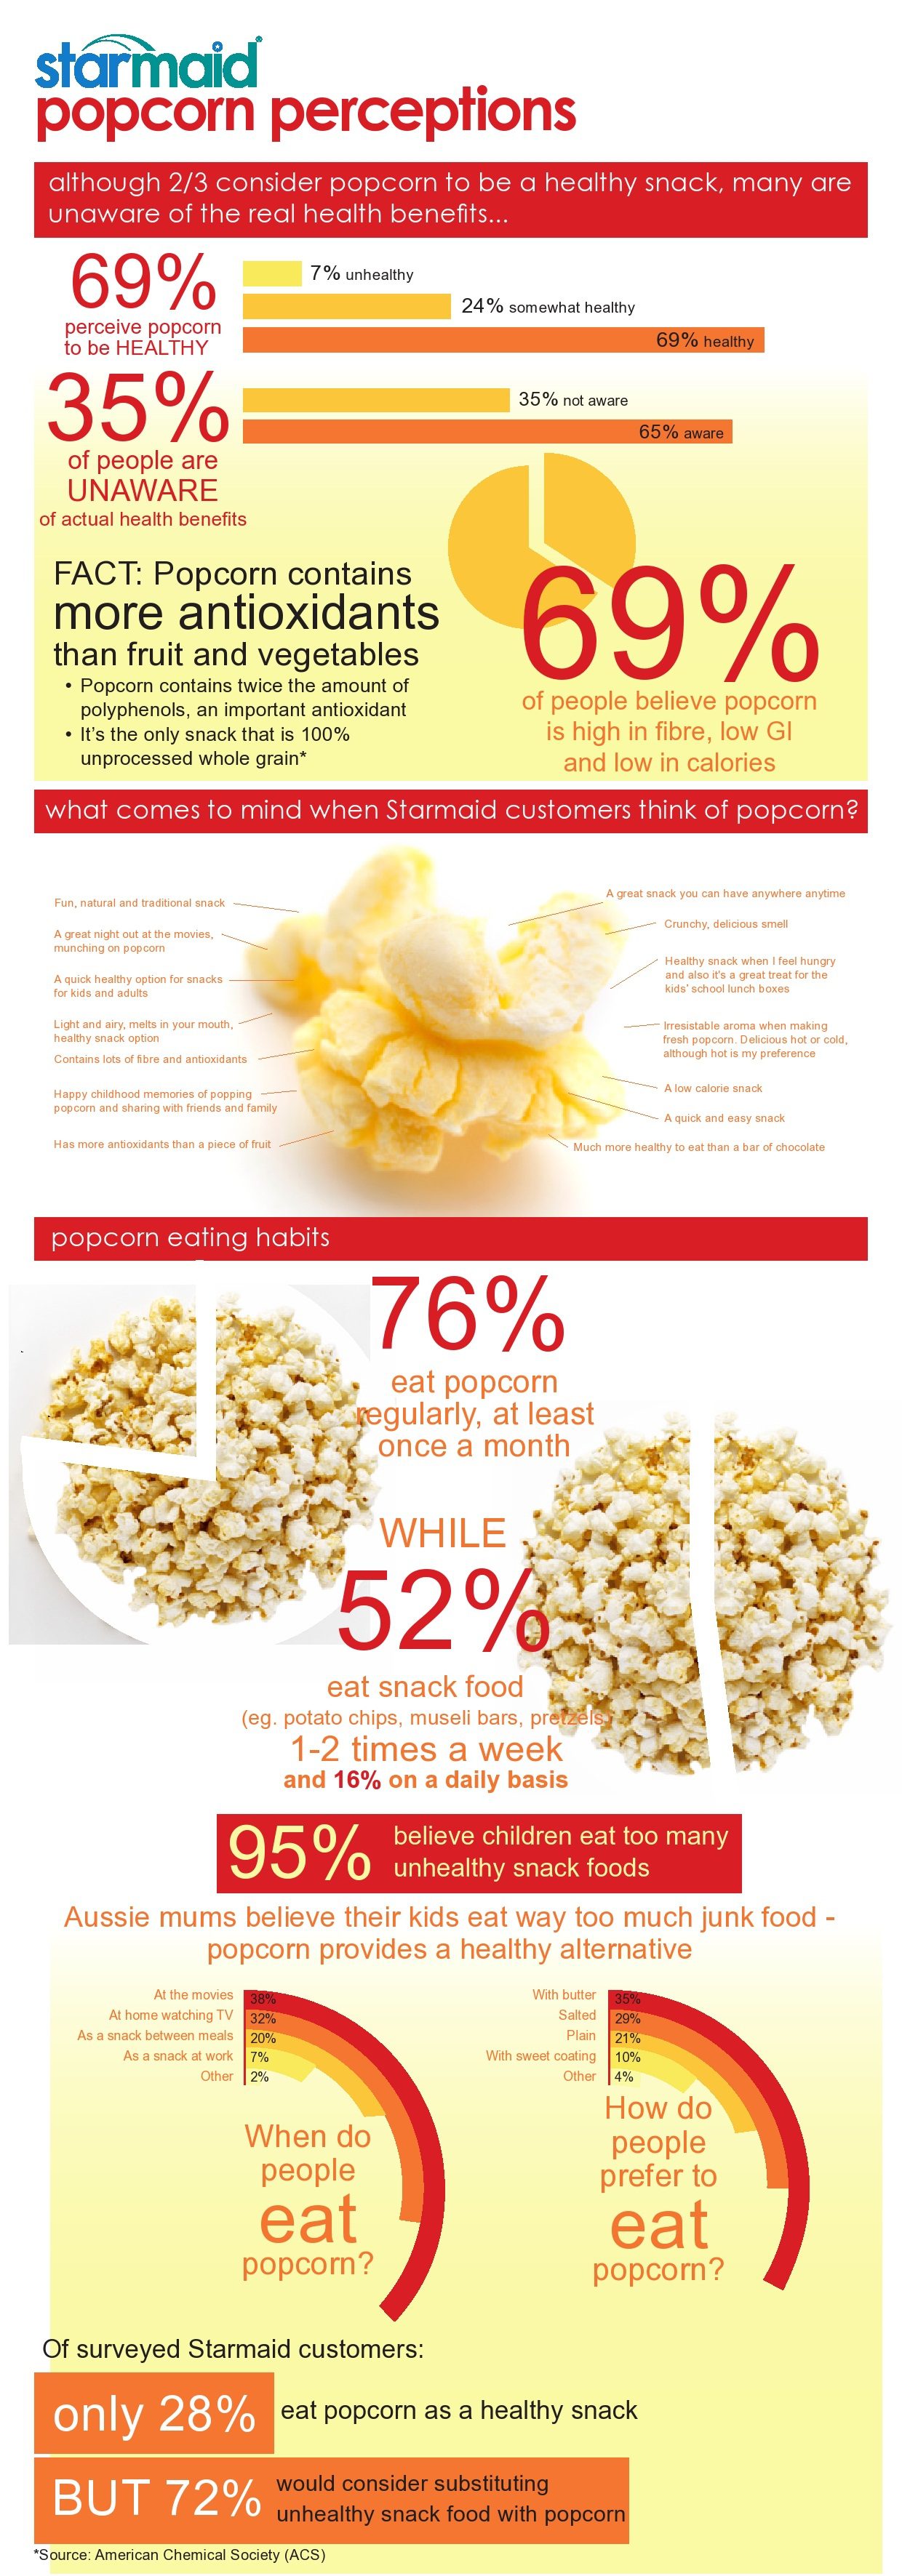 Who Invented Microwave Popcorn